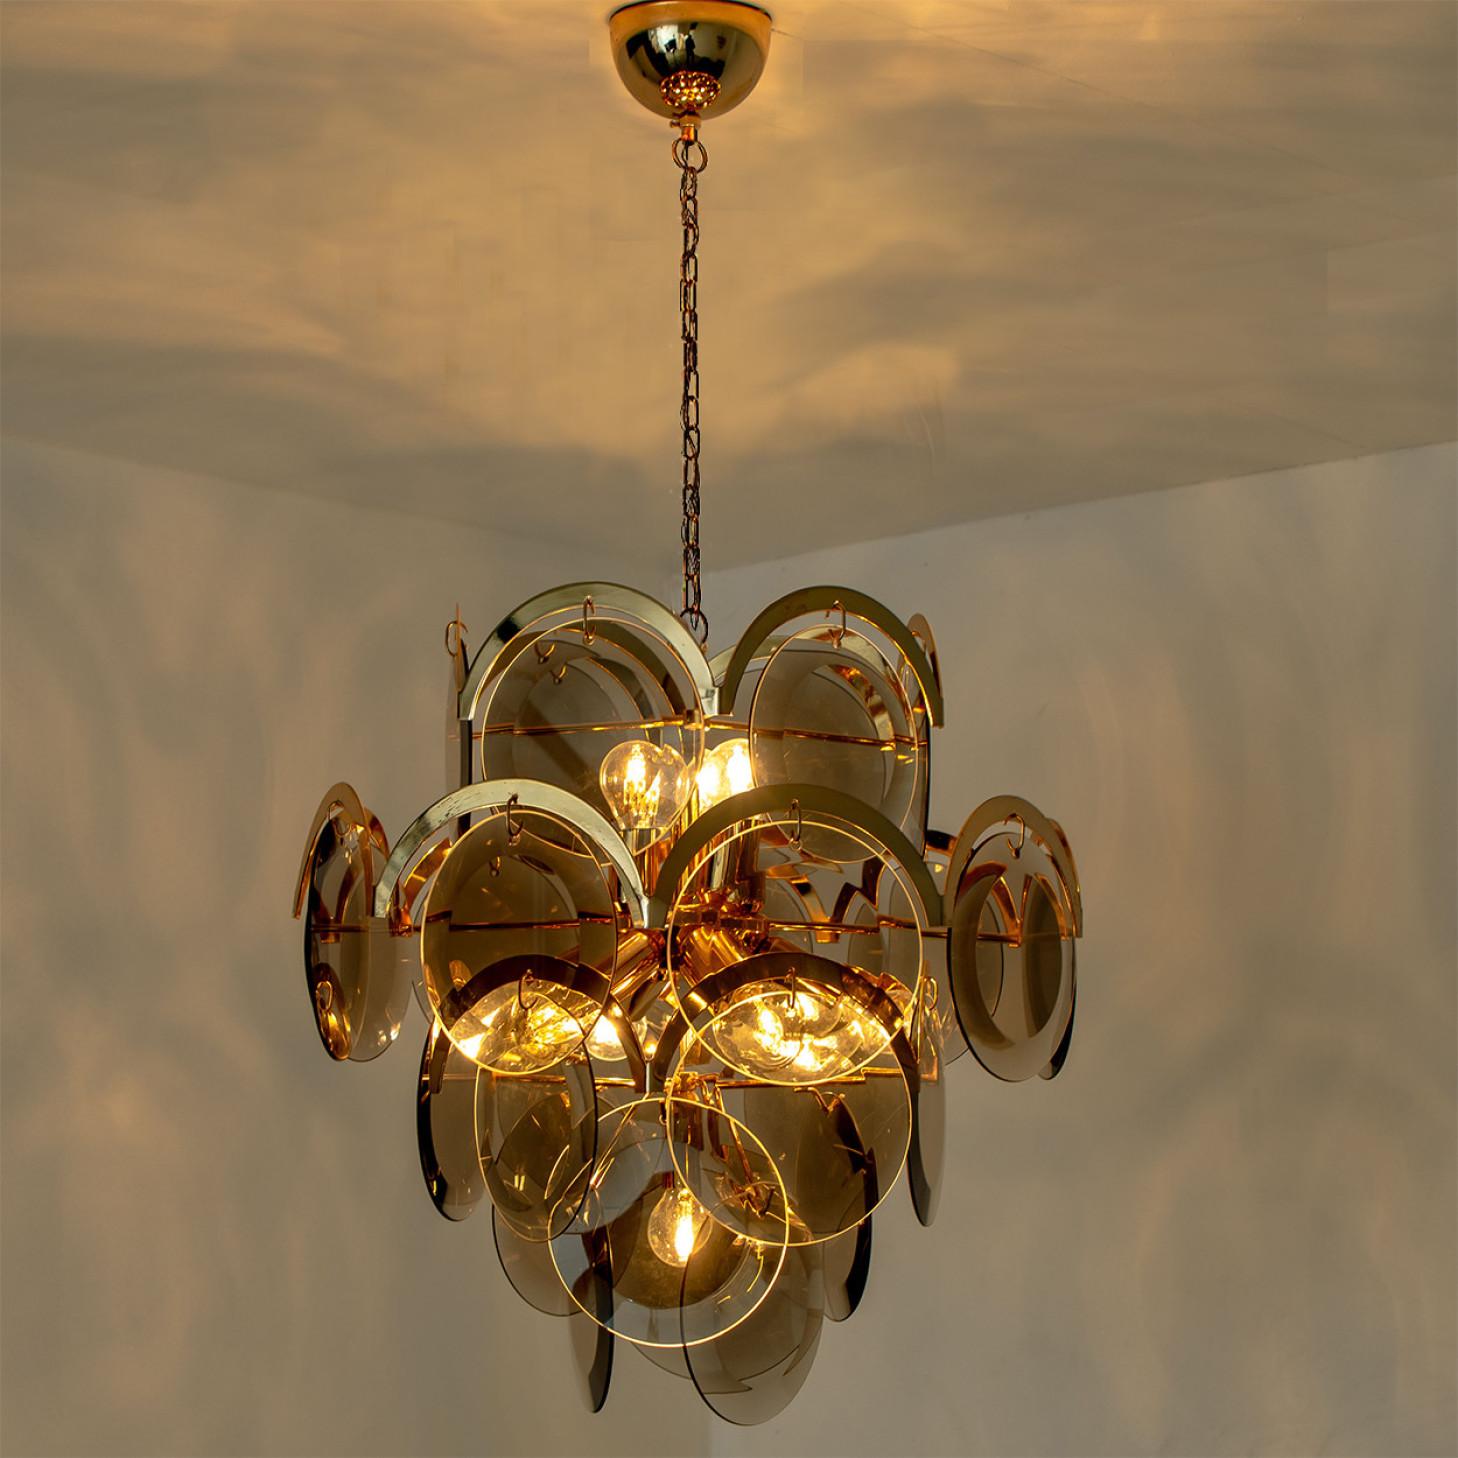 Pair of Smoked Glass and Brass Chandelier in style of Vistosi, Italy, 1970s For Sale 4